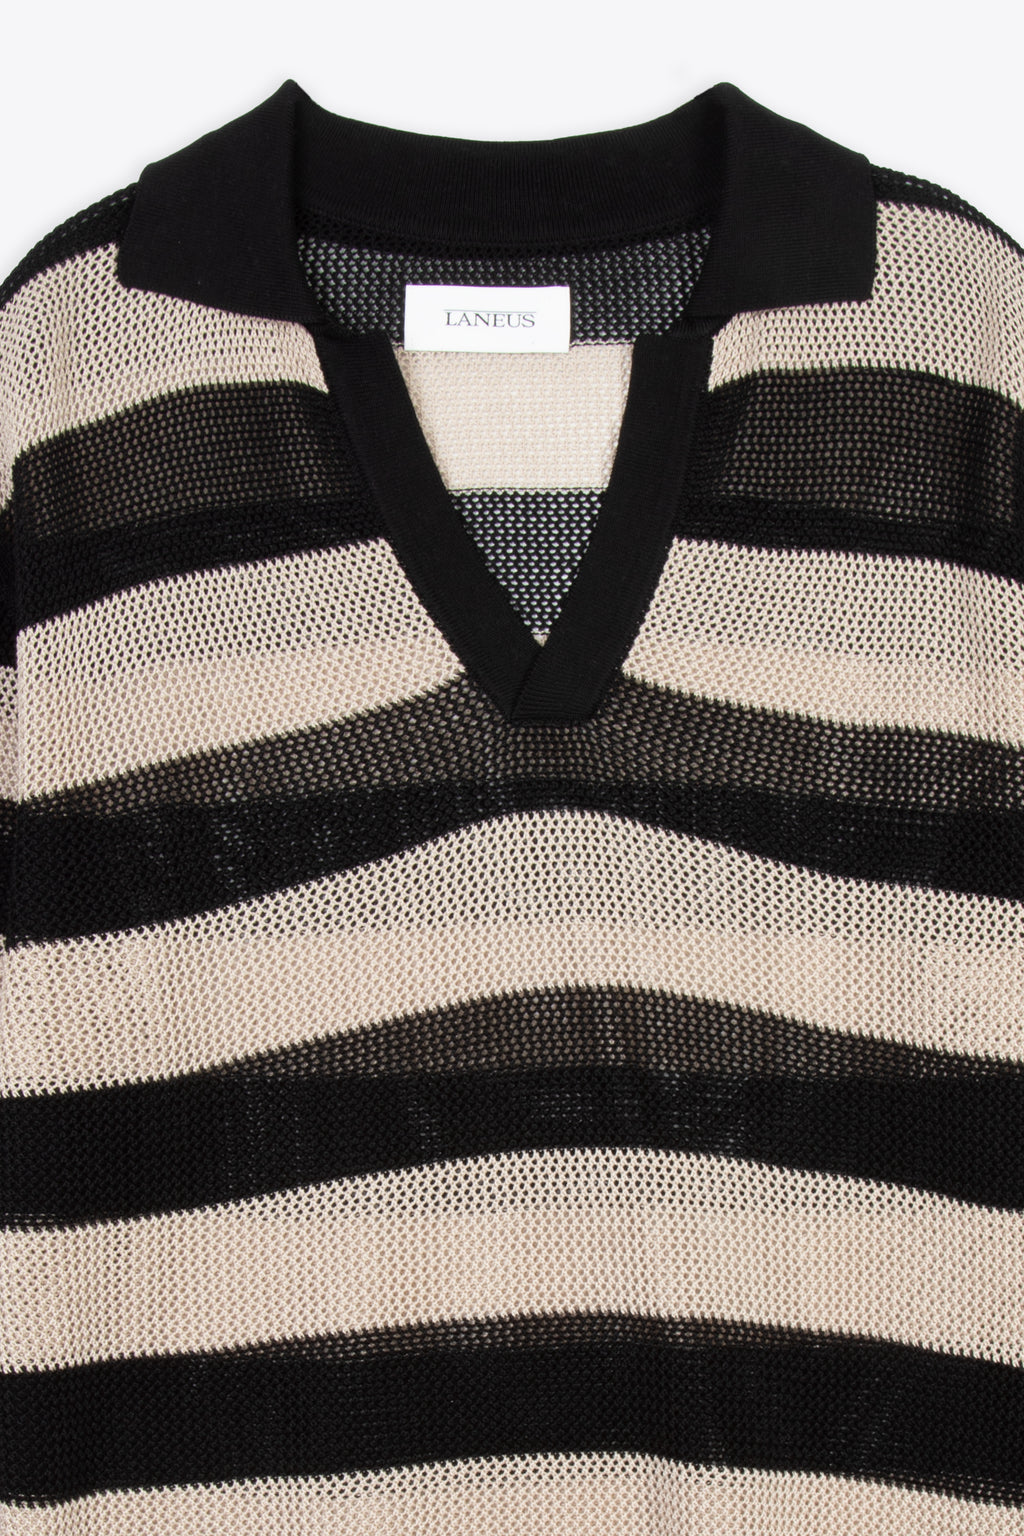 alt-image__Beige-and-black-striped-mesh-knitted-polo-shirt---Mesh-polo-shirt-